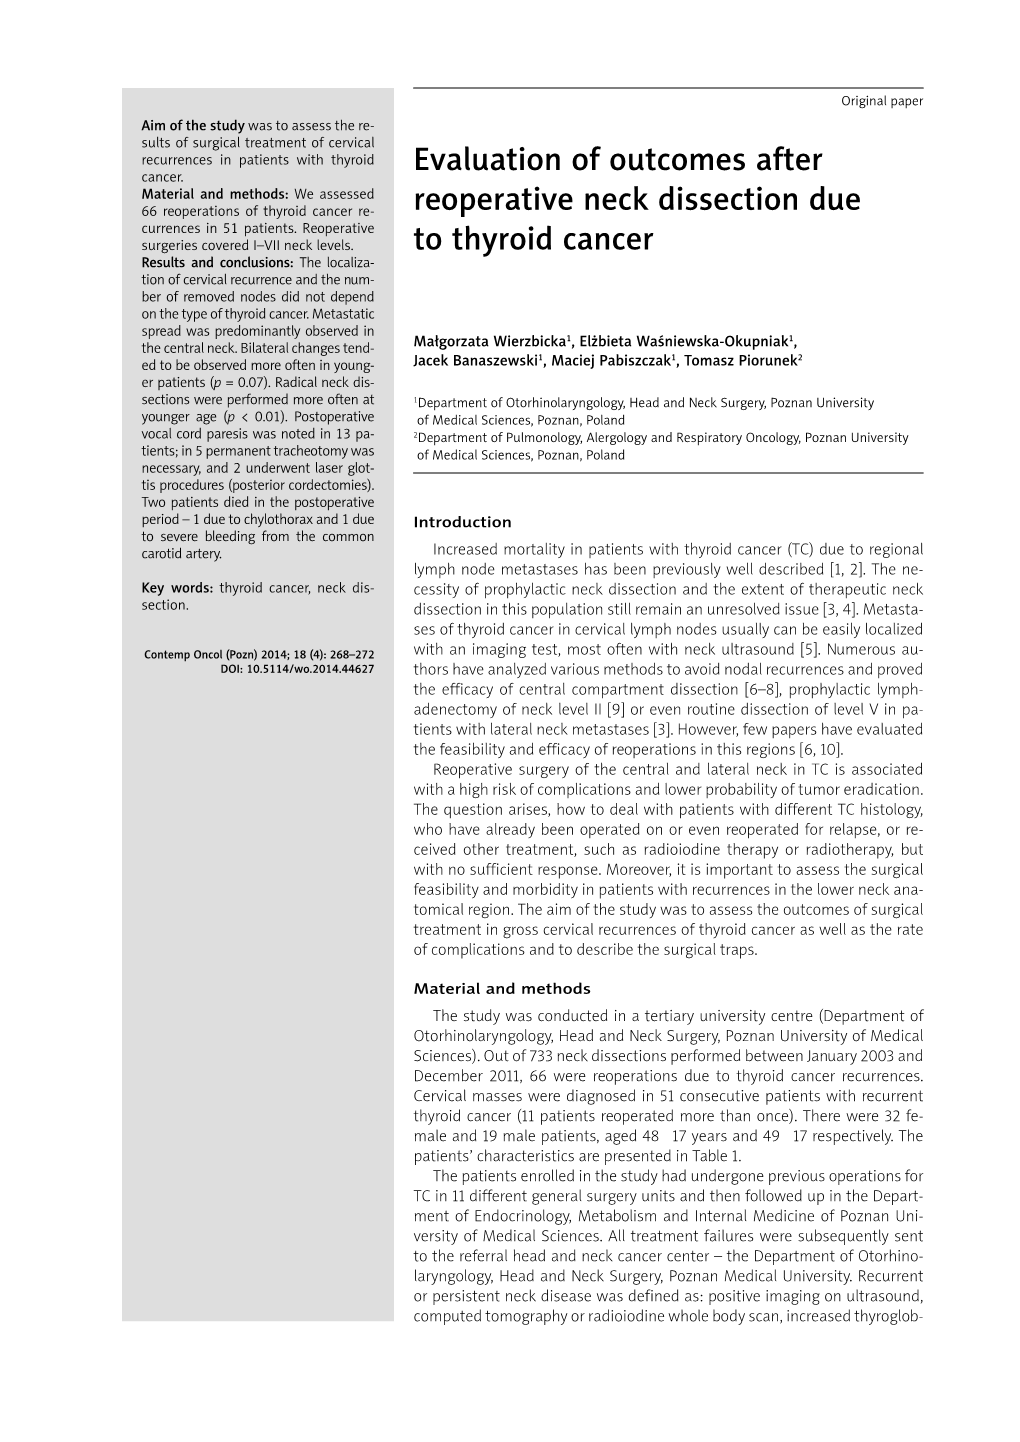 Evaluation of Outcomes After Reoperative Neck Dissection Due to Thyroid Cancer 269